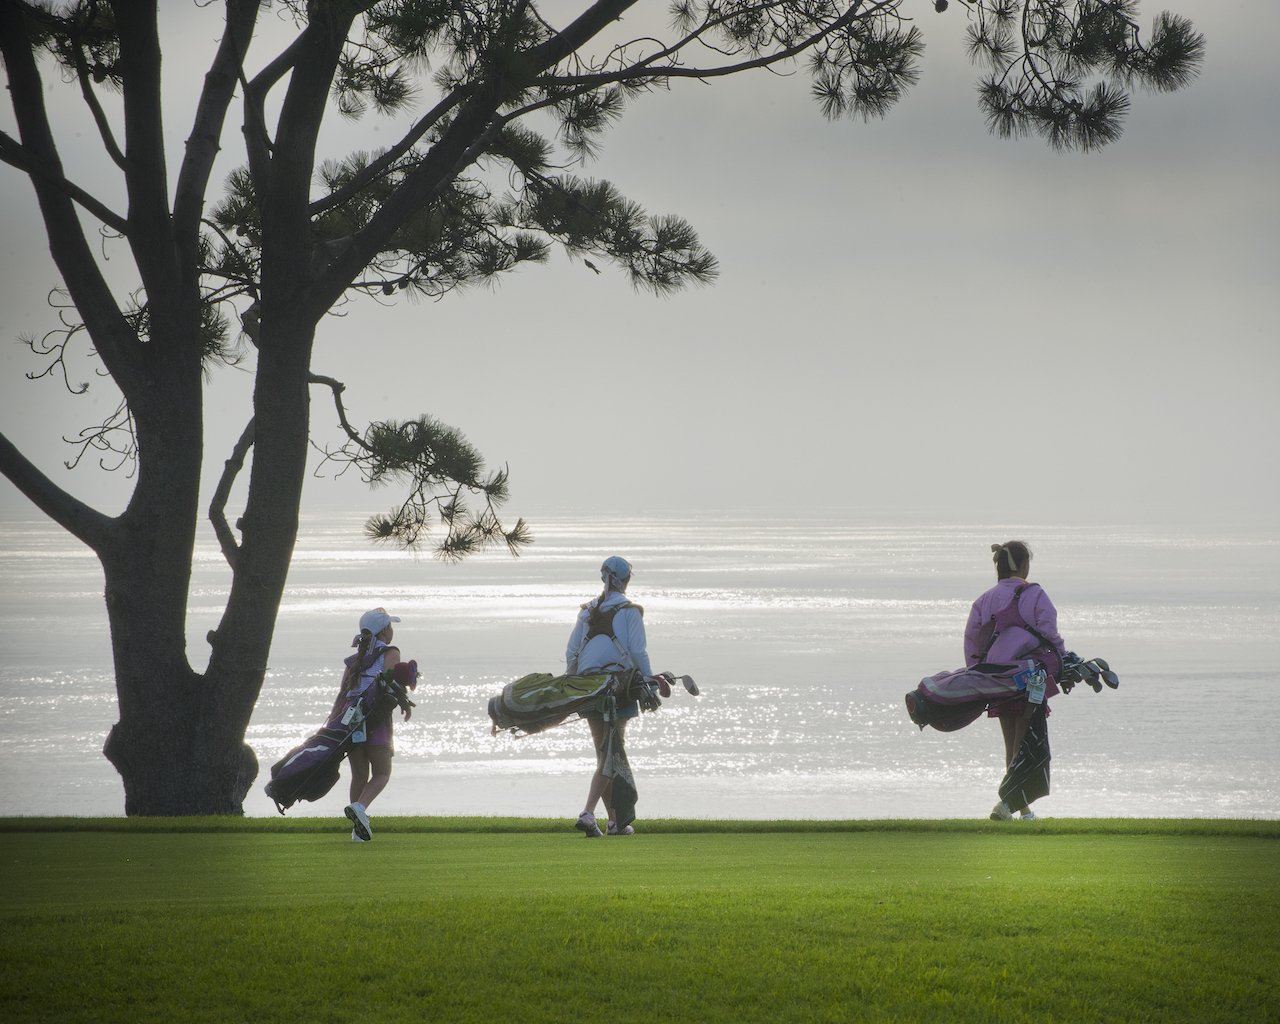 Girls carrying golf bags on course